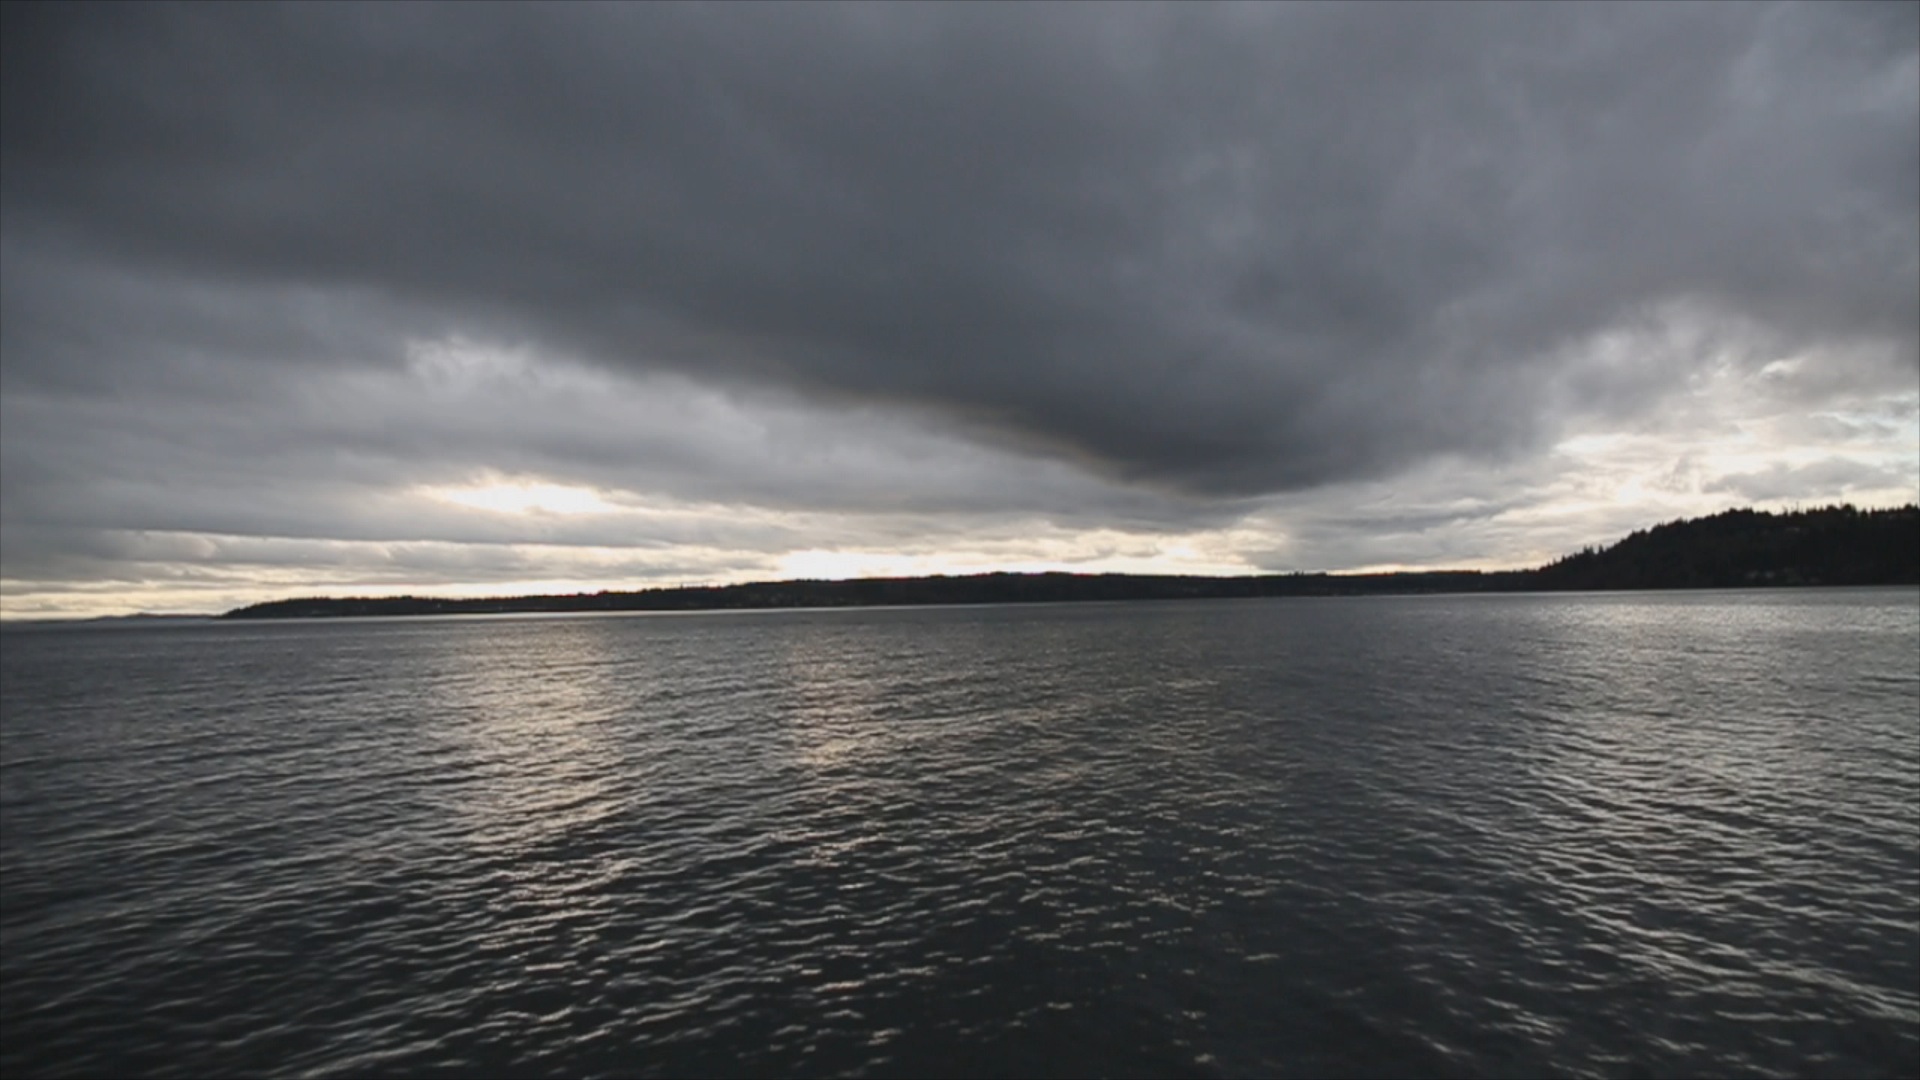  Puget Sound - heading to interview former NFL player, author and activist Dave Meggyesy (January 2013) 